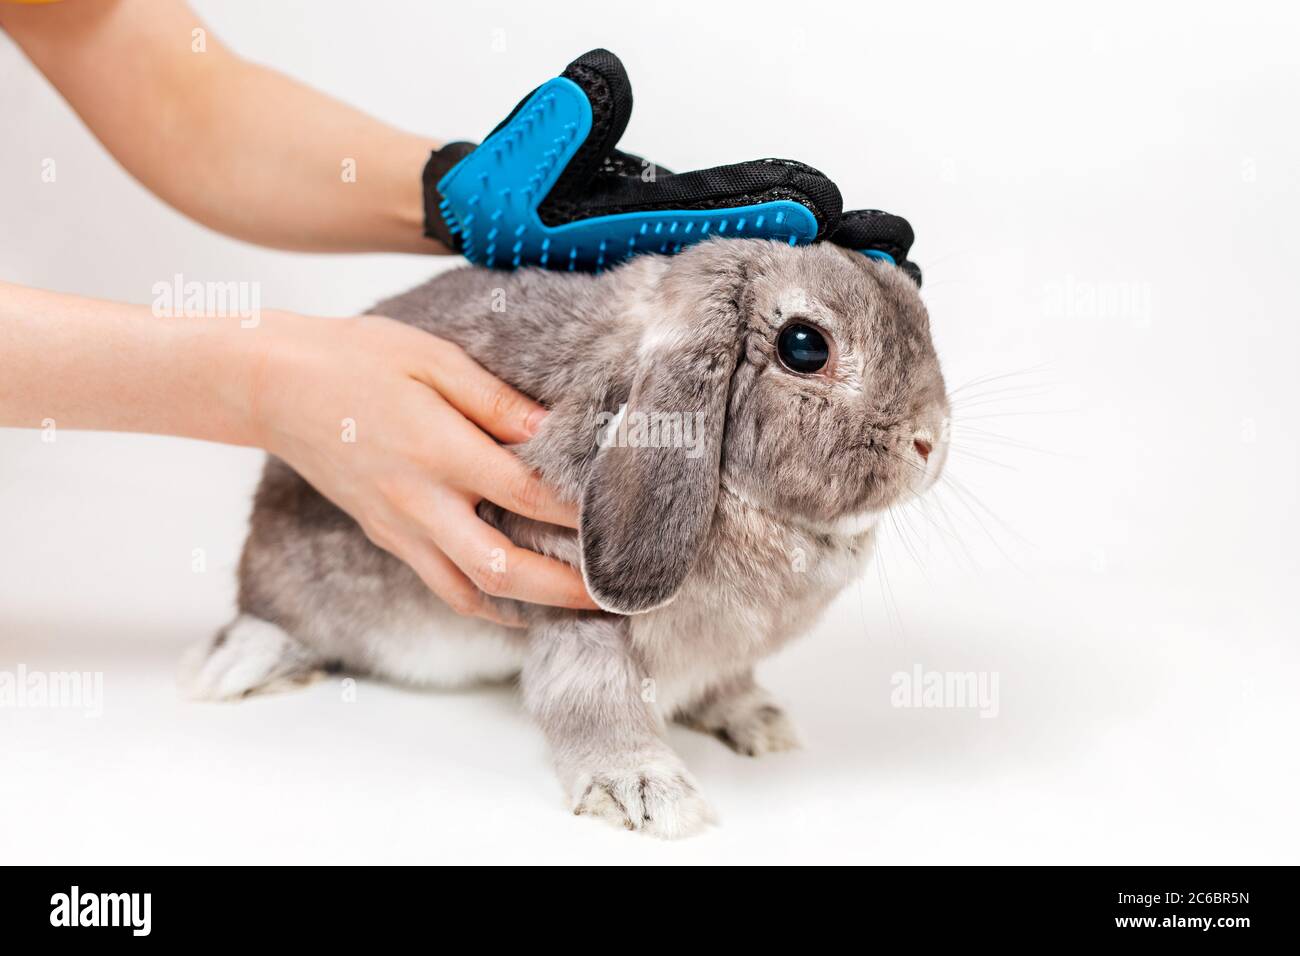 Woman grooming a lop-eared gray rabbit with a comb glove. White background. Copy space. Concept of pet health care. Stock Photo